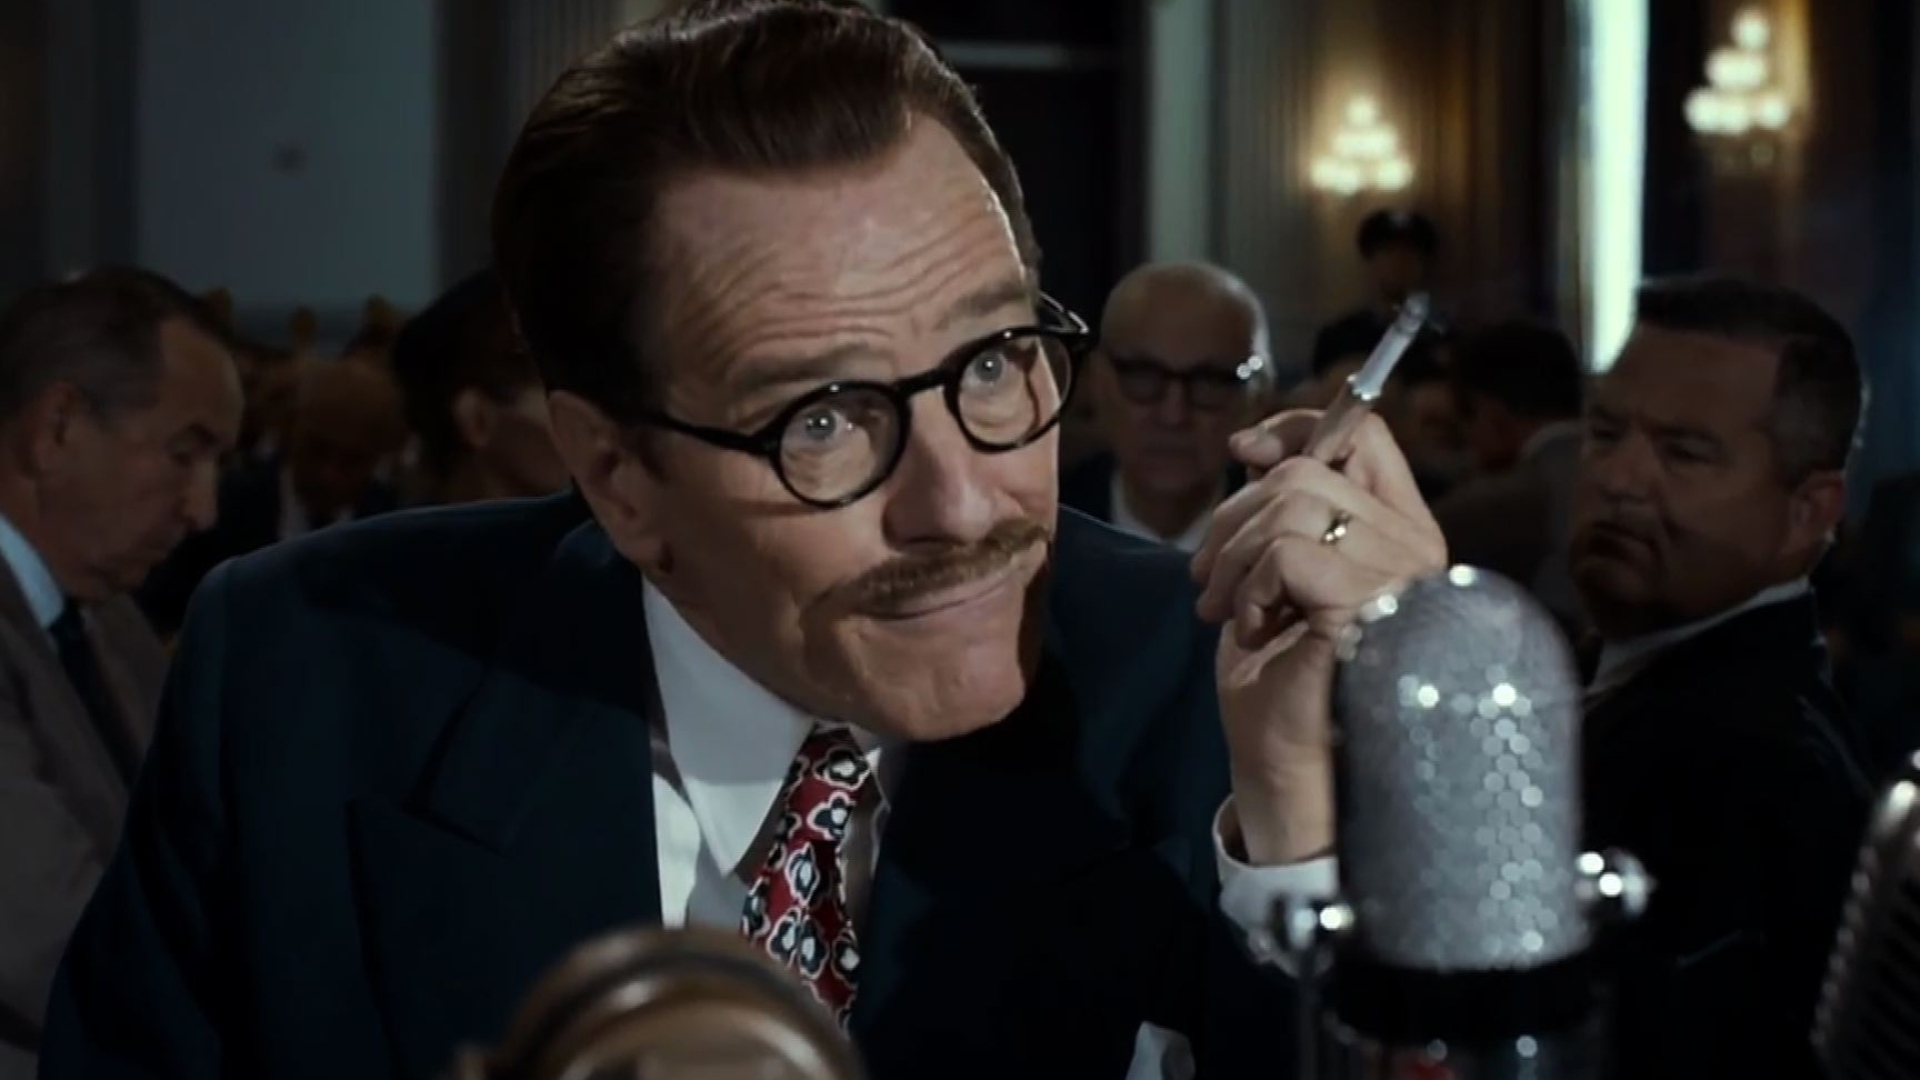 Trumbo: Blacklisted from Hollywood for his membership in the Communist Party. 1920x1080 Full HD Wallpaper.